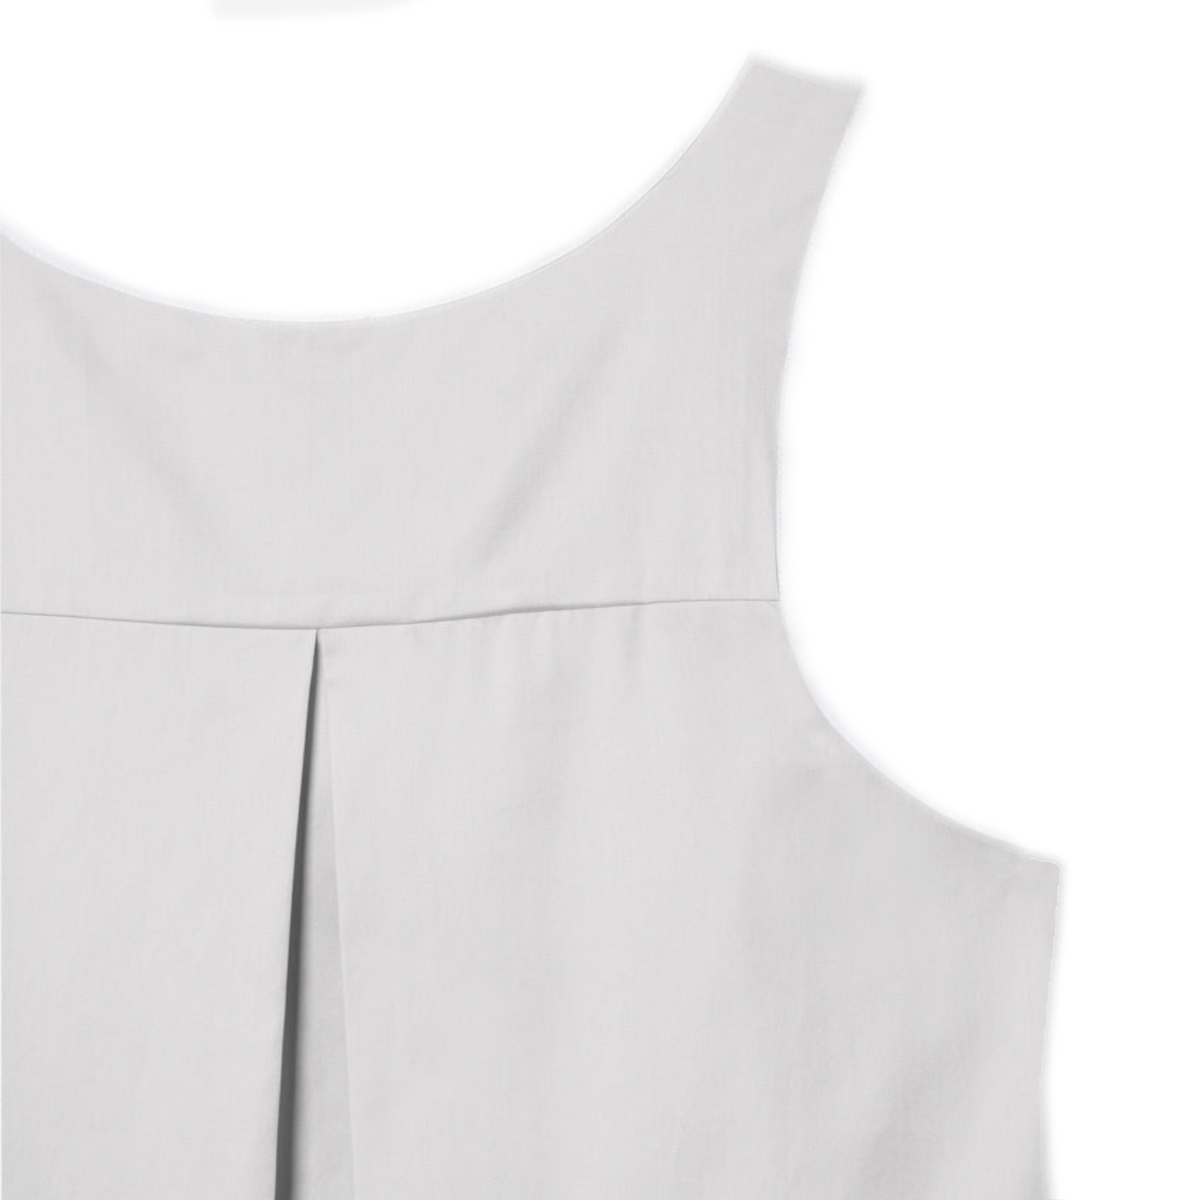 Tin Corner View of White Sferra Caricia Swing Tank Top against a white background